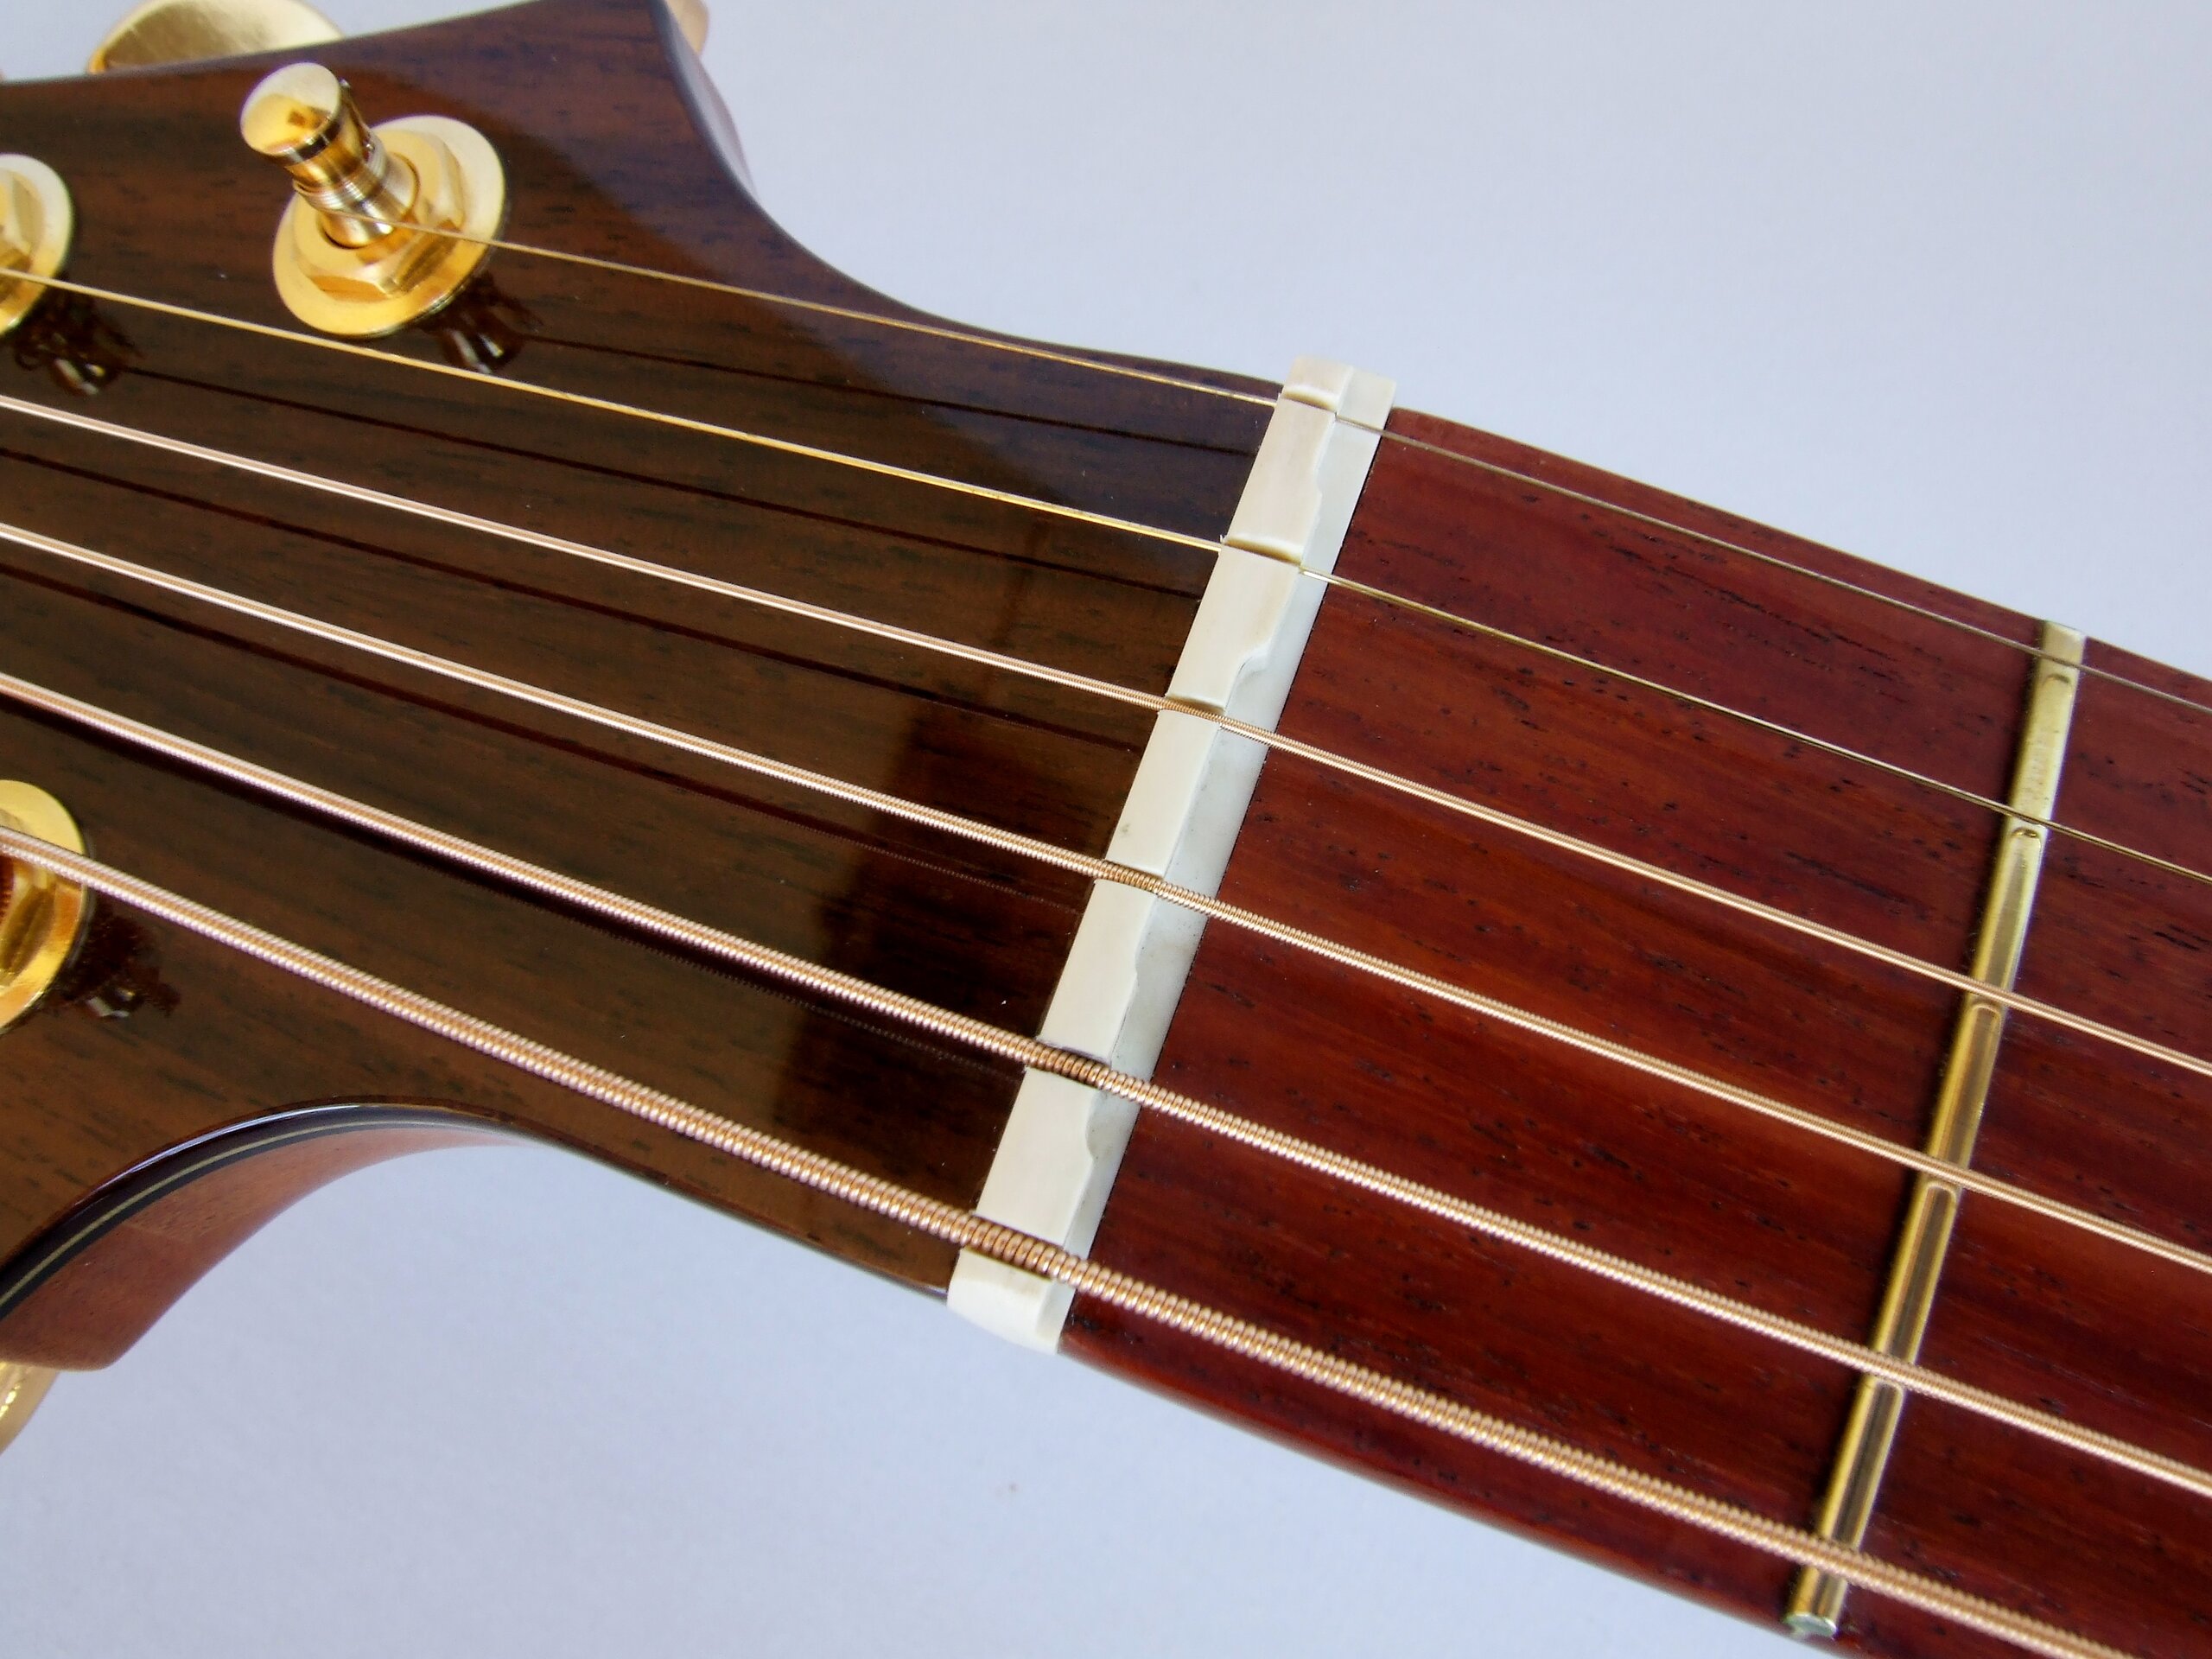 Detail of compensated nut on a steel string guitar